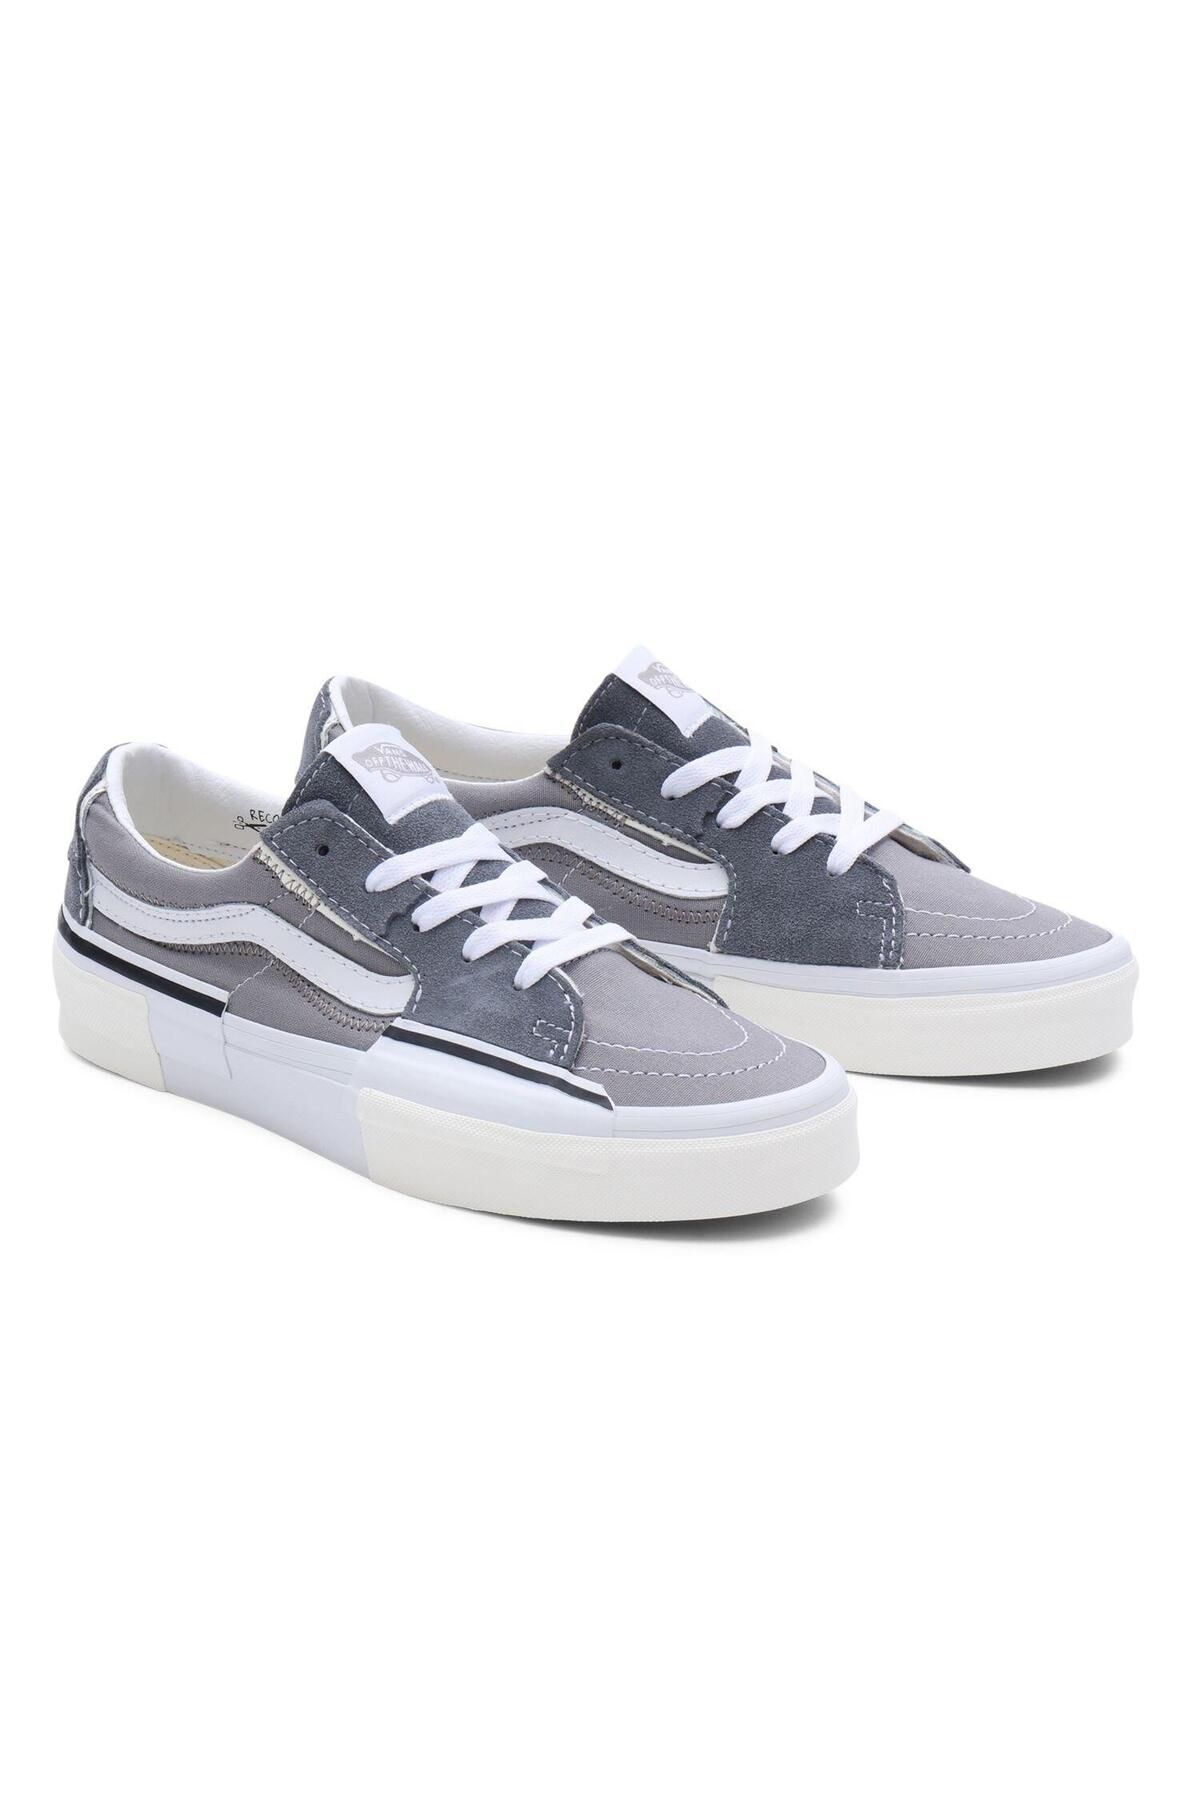 Vans SK8-Low Reconstruct VN0009QSGRY1